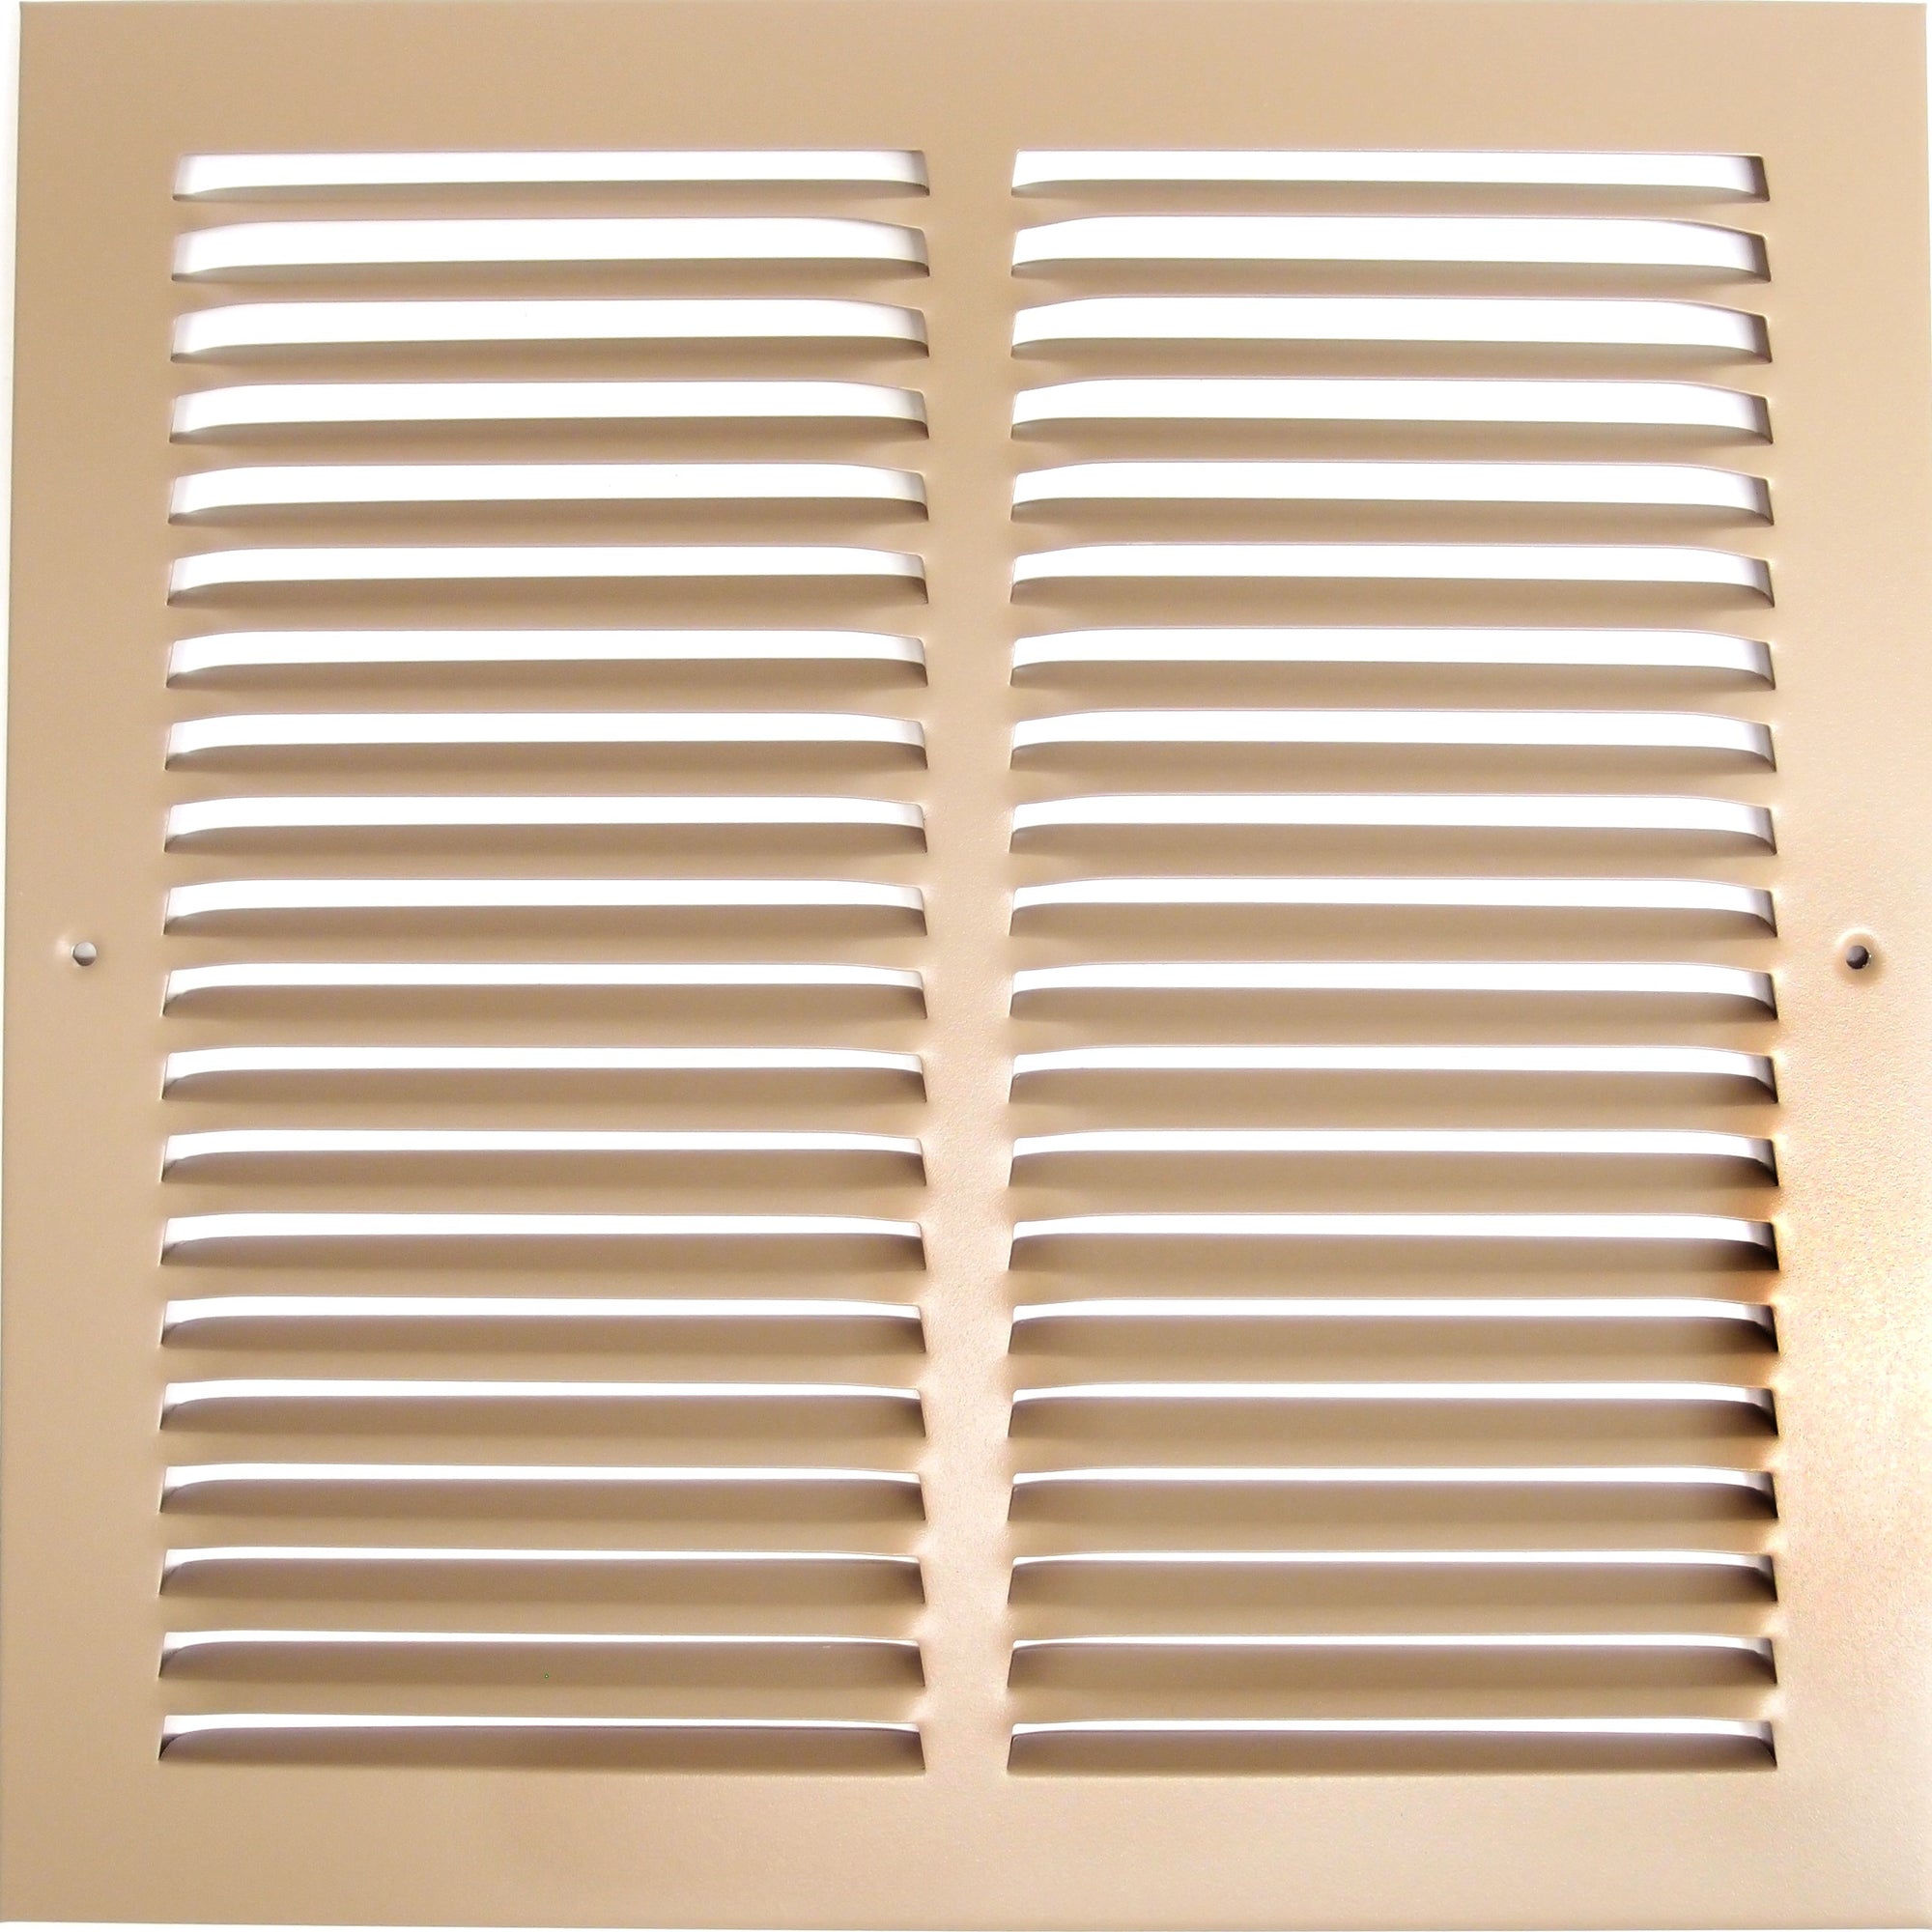 10" X 14" Air Vent Return Grilles - Sidewall and Ceiling - Steel